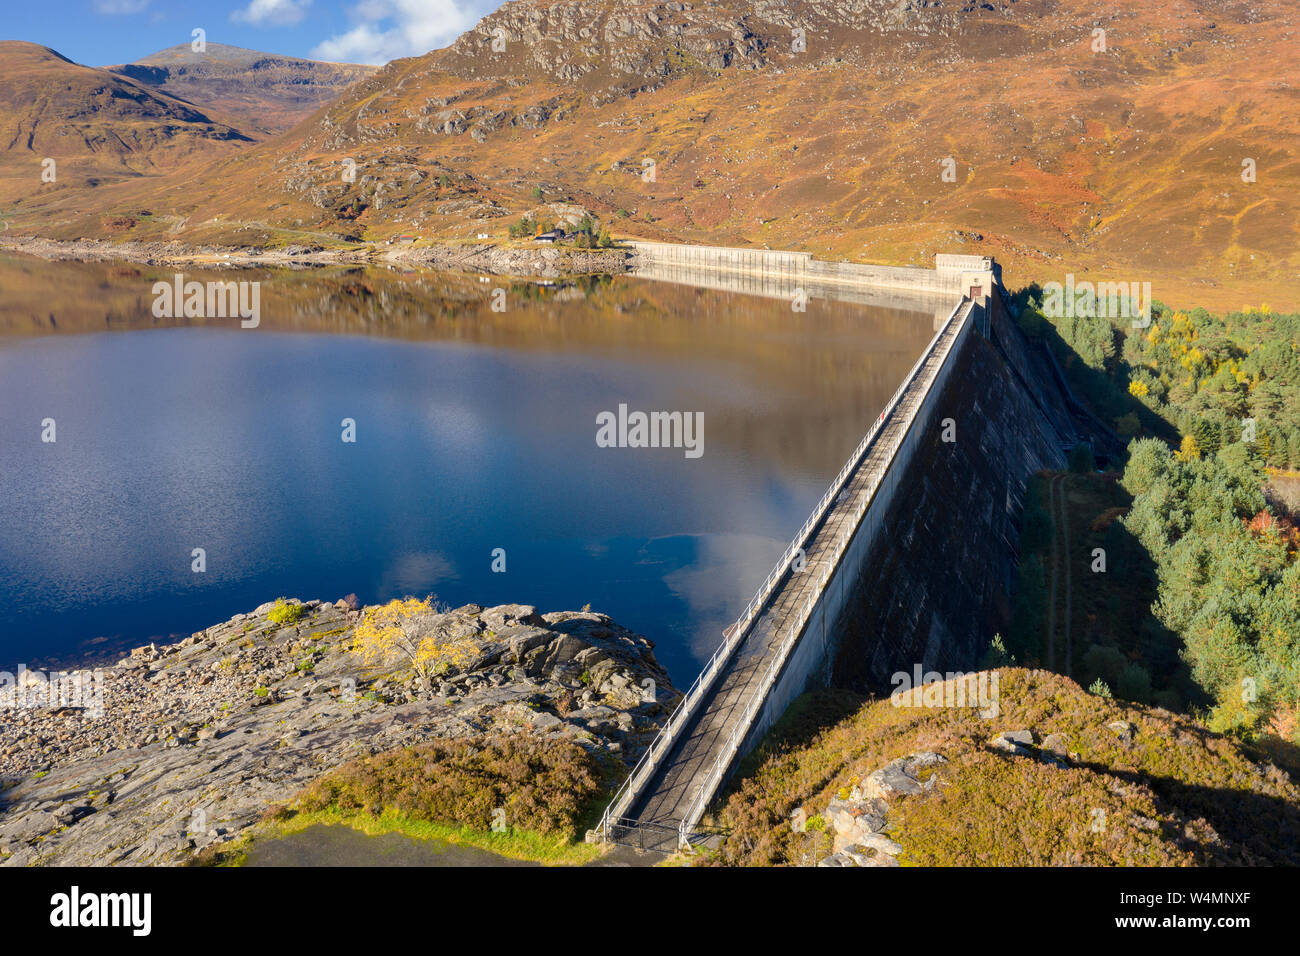 Mullardoch Dam, part of the hydro electric scheme built throughout Highland Scotland in the 1950s and 1960s.  This dam was built in 1951. Stock Photo